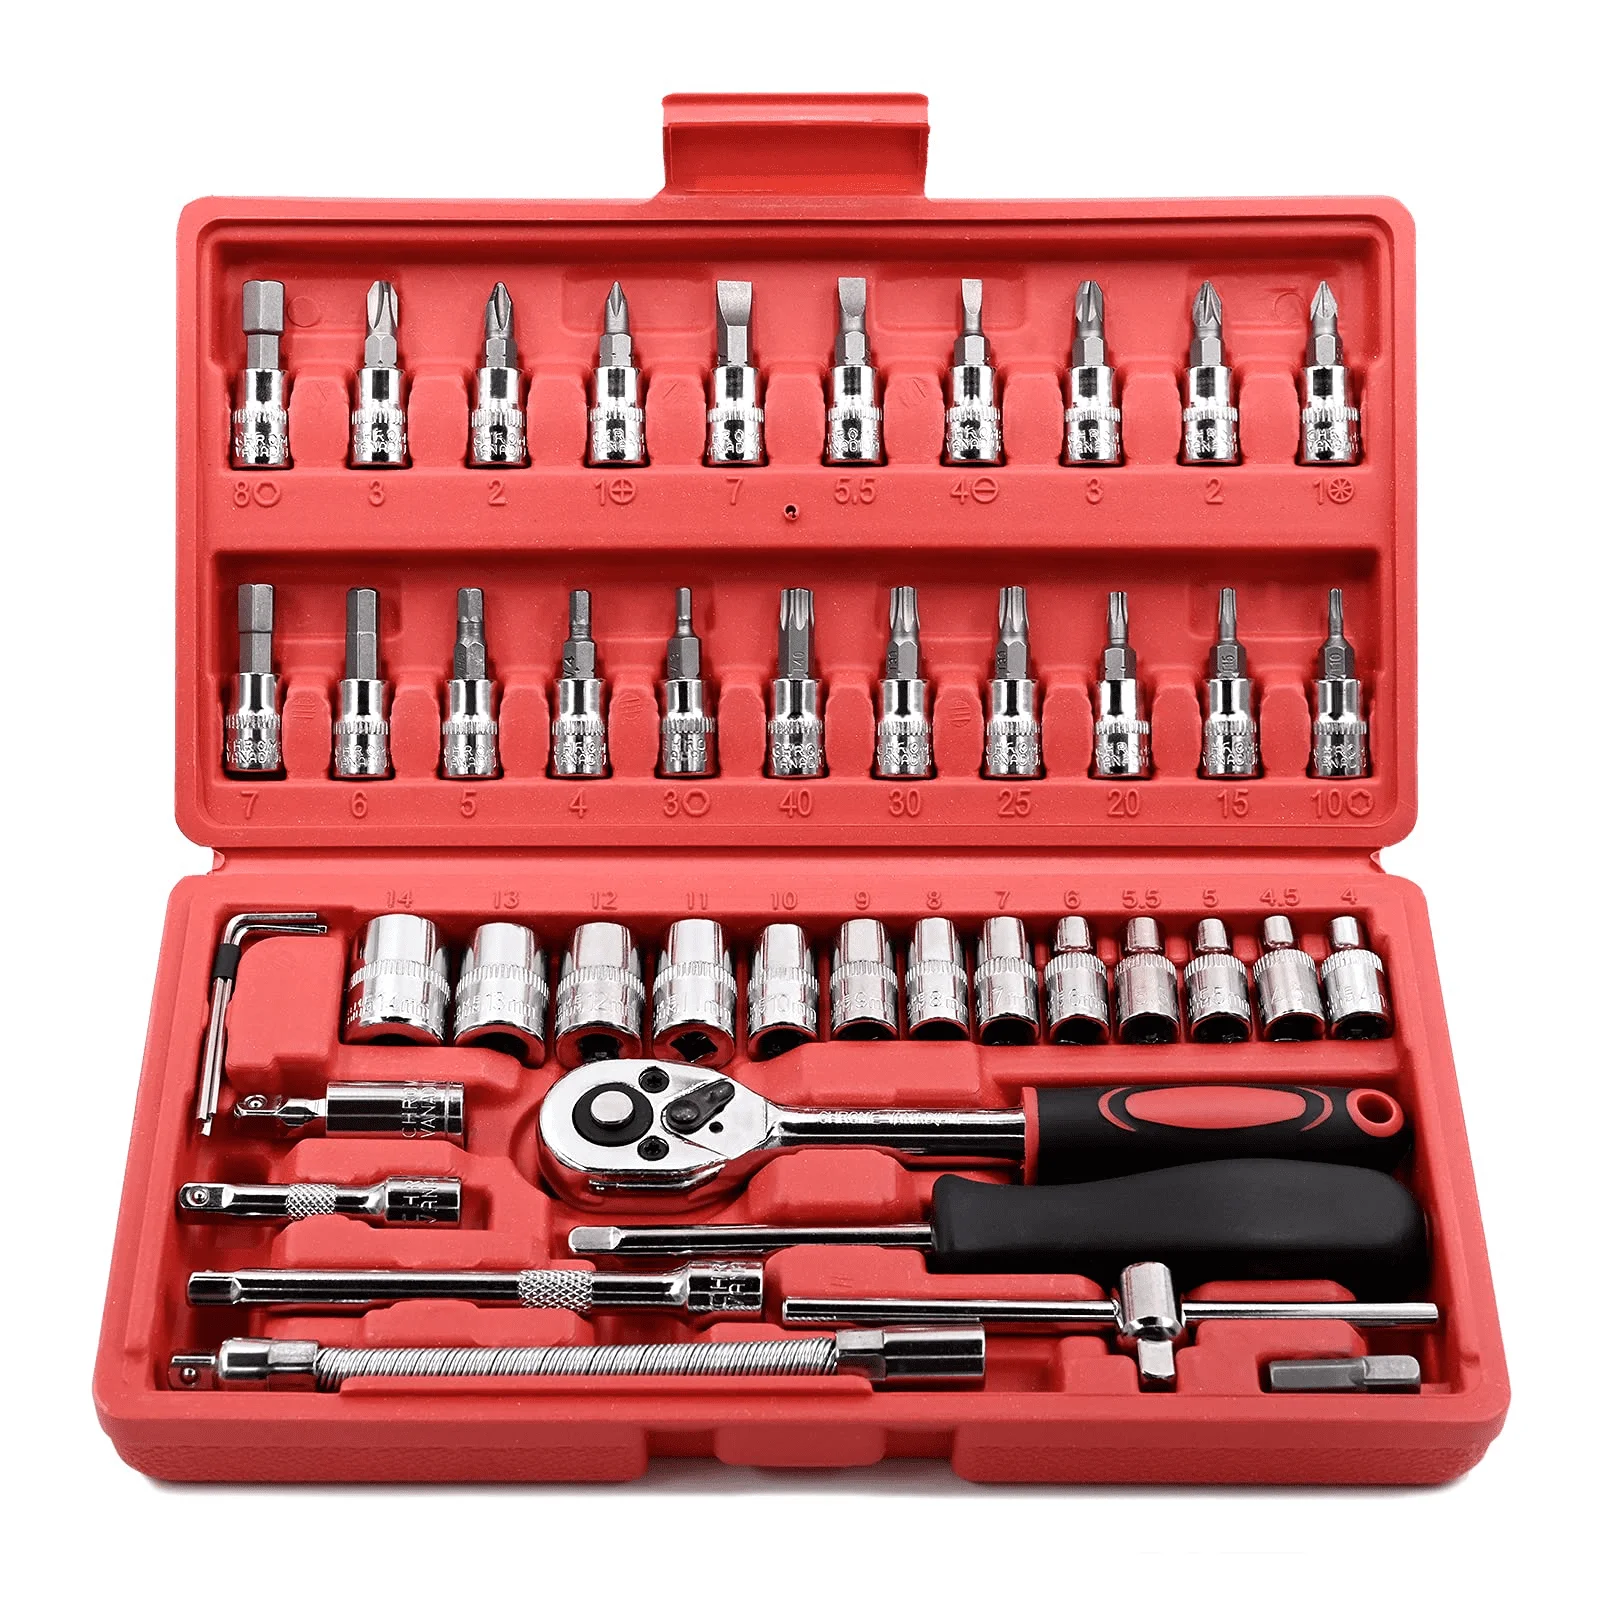 46 Pieces 1/4 inch Drive Socket Ratchet Wrench Set, with Bit Socket Set Metric and Extension Bar for Auto Repairing and Househol